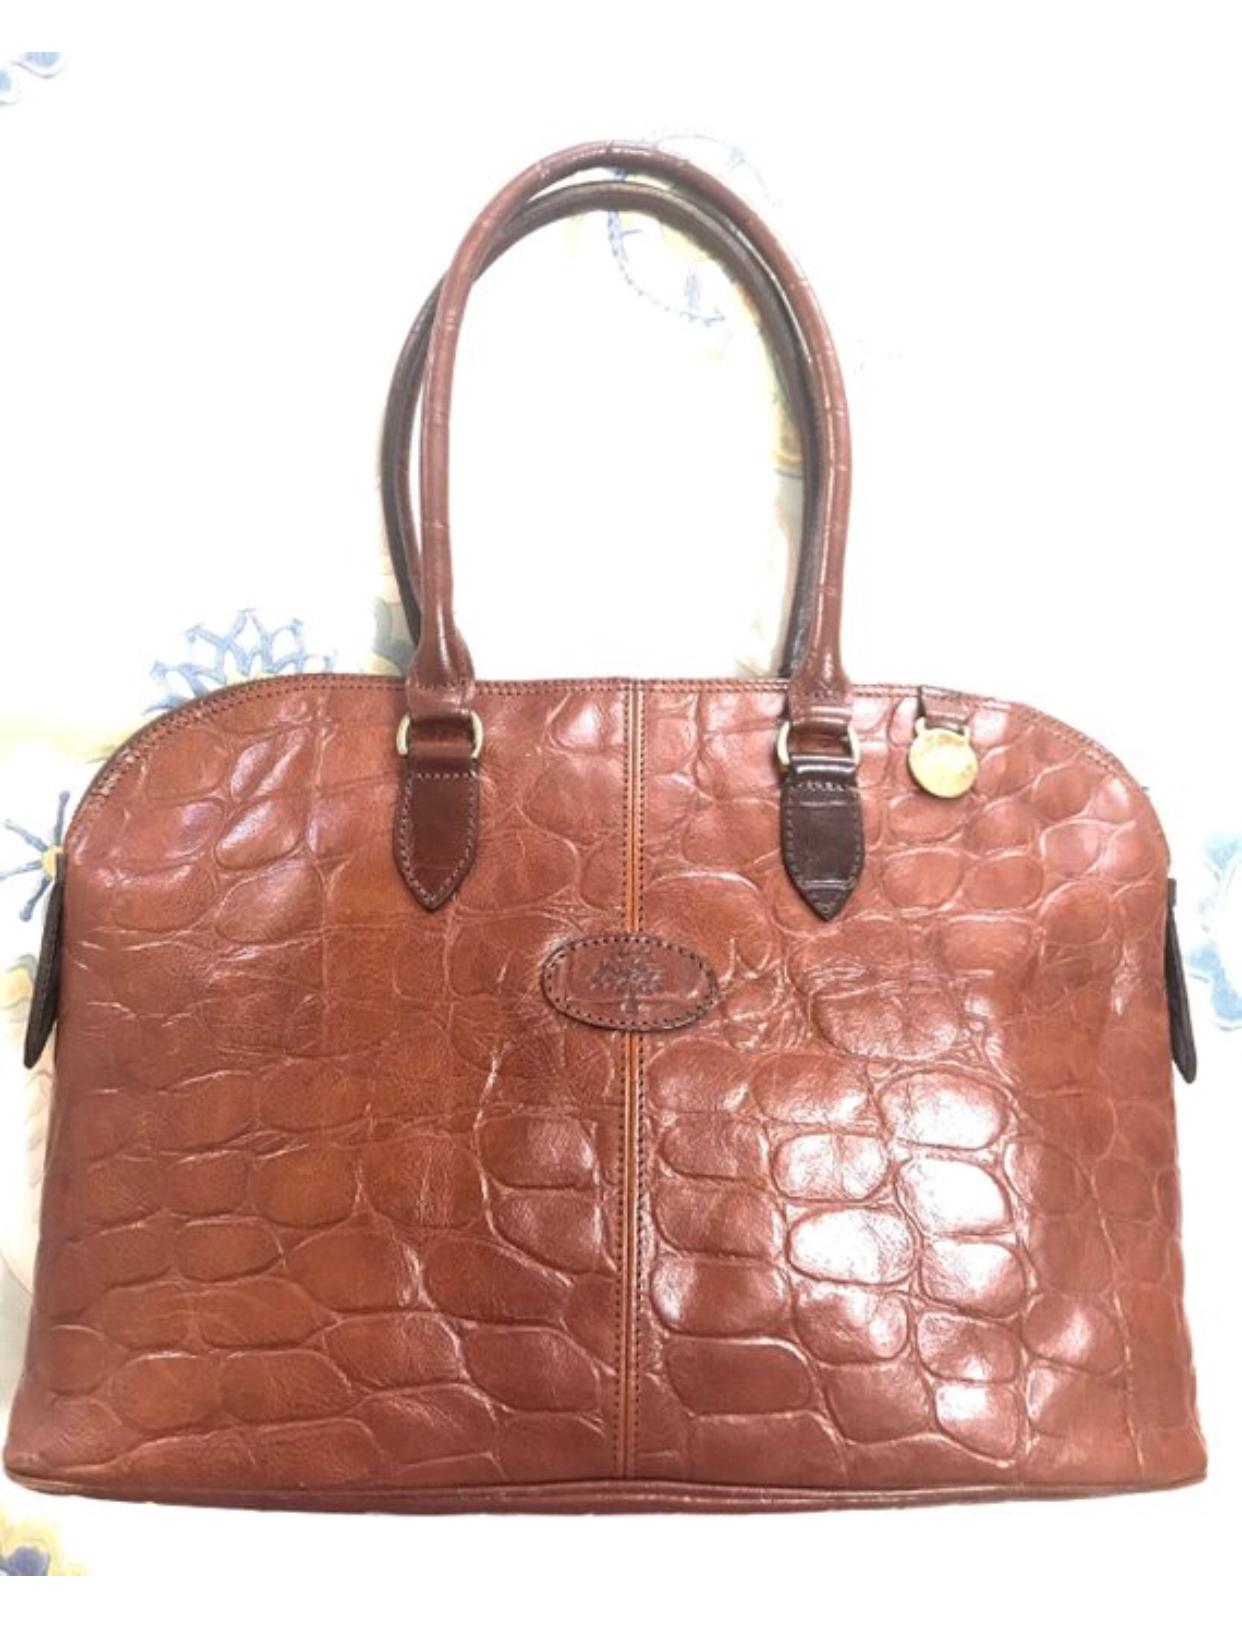 Vintage Mulberry croc embossed brown leather bolide tote bag. By Roger Saul. For Sale 3